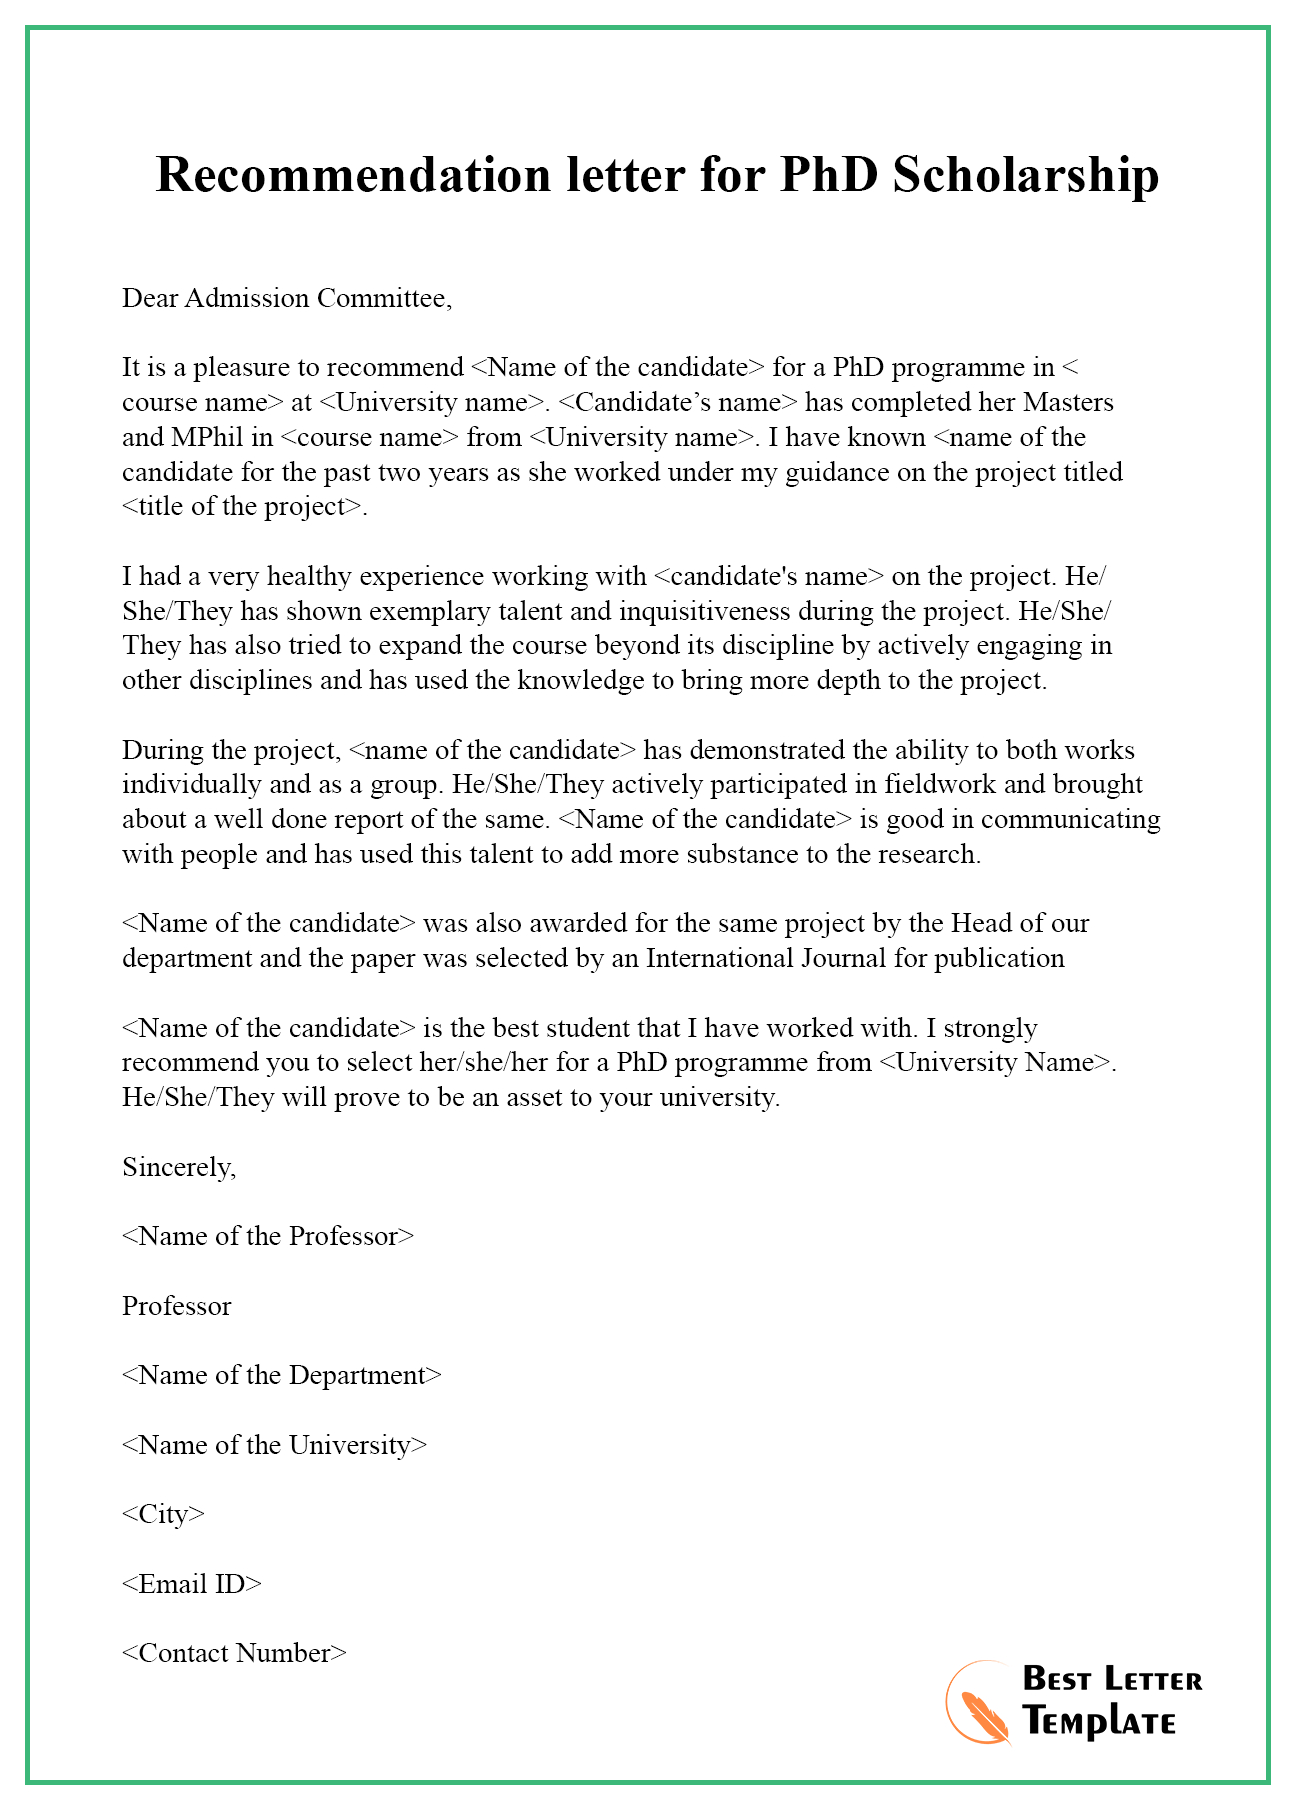 Recommendation Letter For Phd Scholarship Best Letter Template with regard to dimensions 1300 X 1806